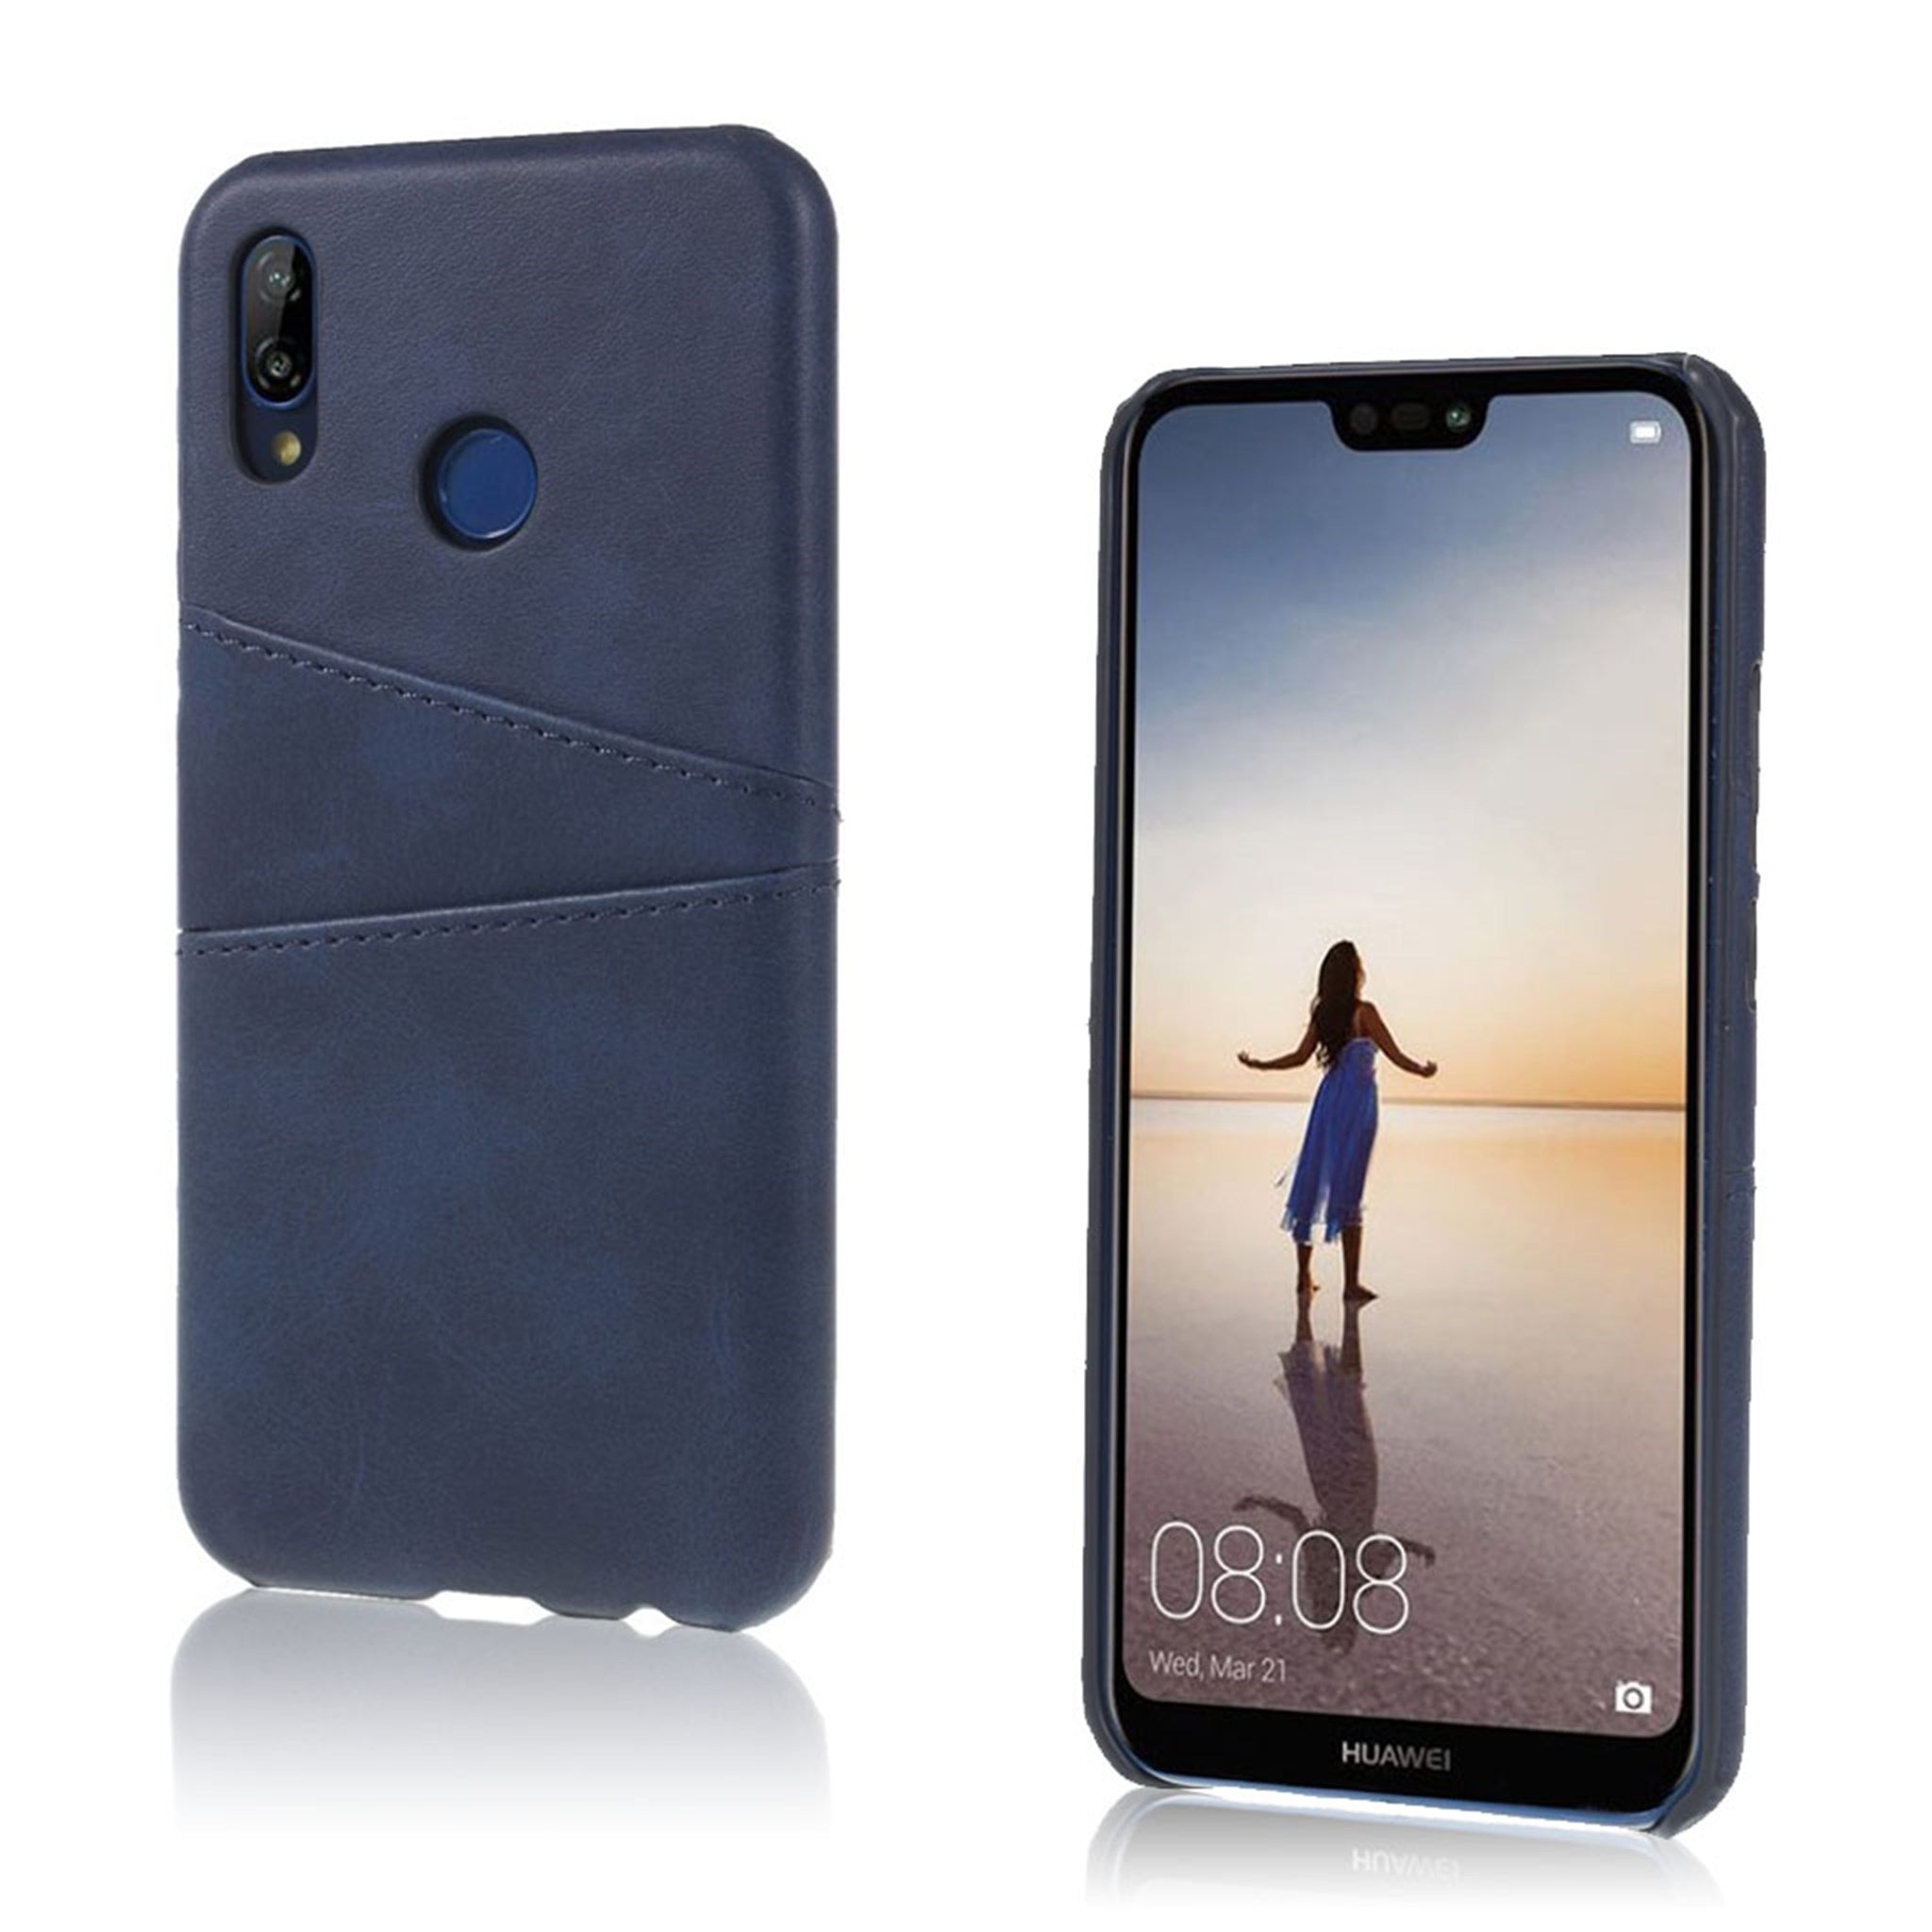 Huawei P20 Lite double card slots leather case - Dark Blue